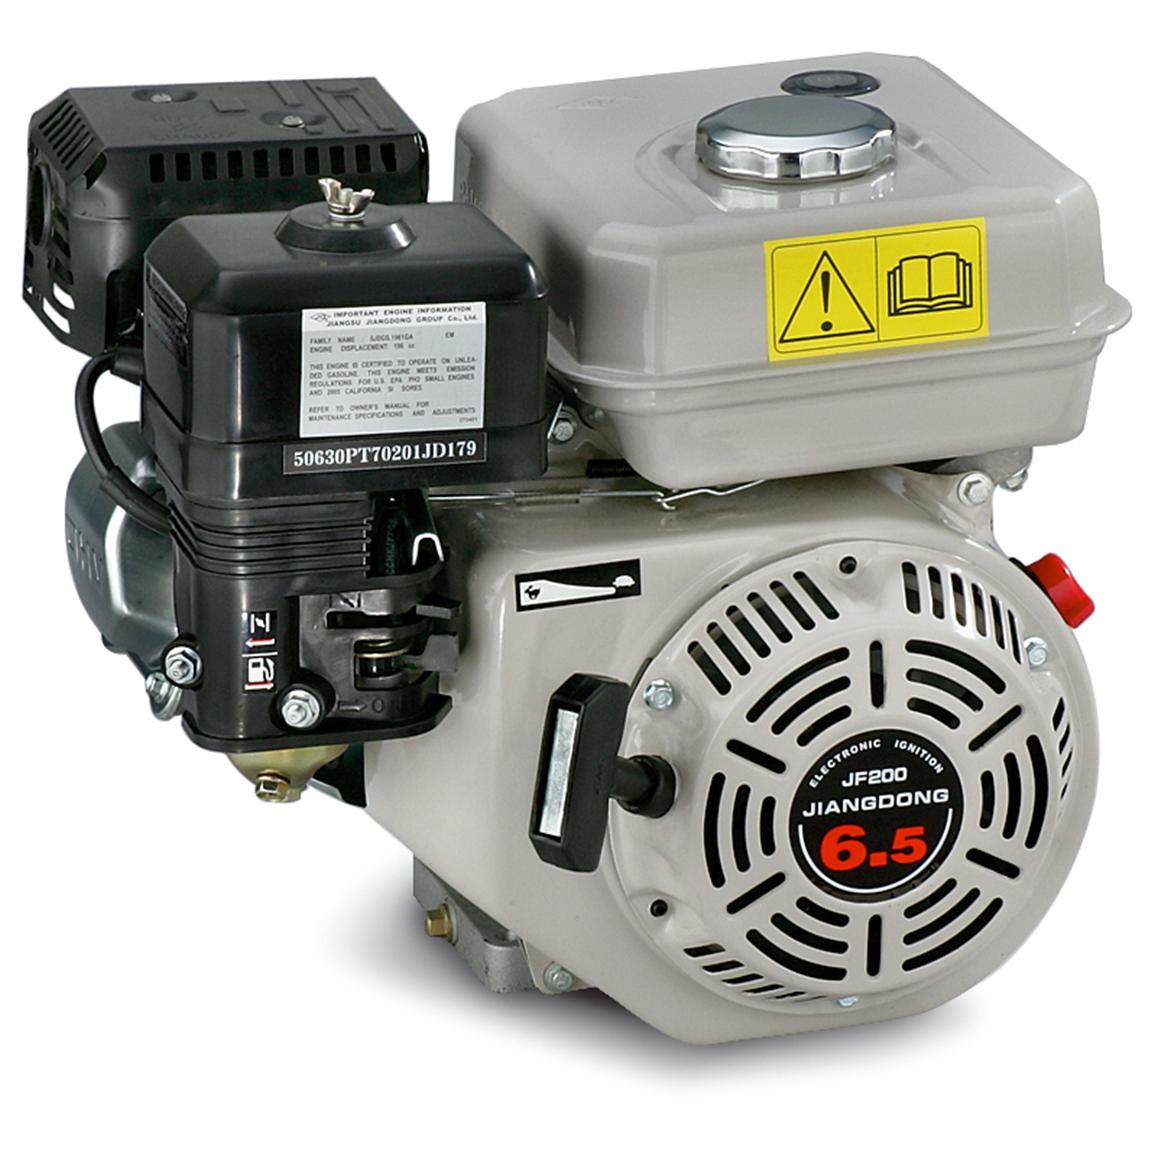 Master Quality® 6 12 Hp 196cc Ohv Commercial Engine 177780